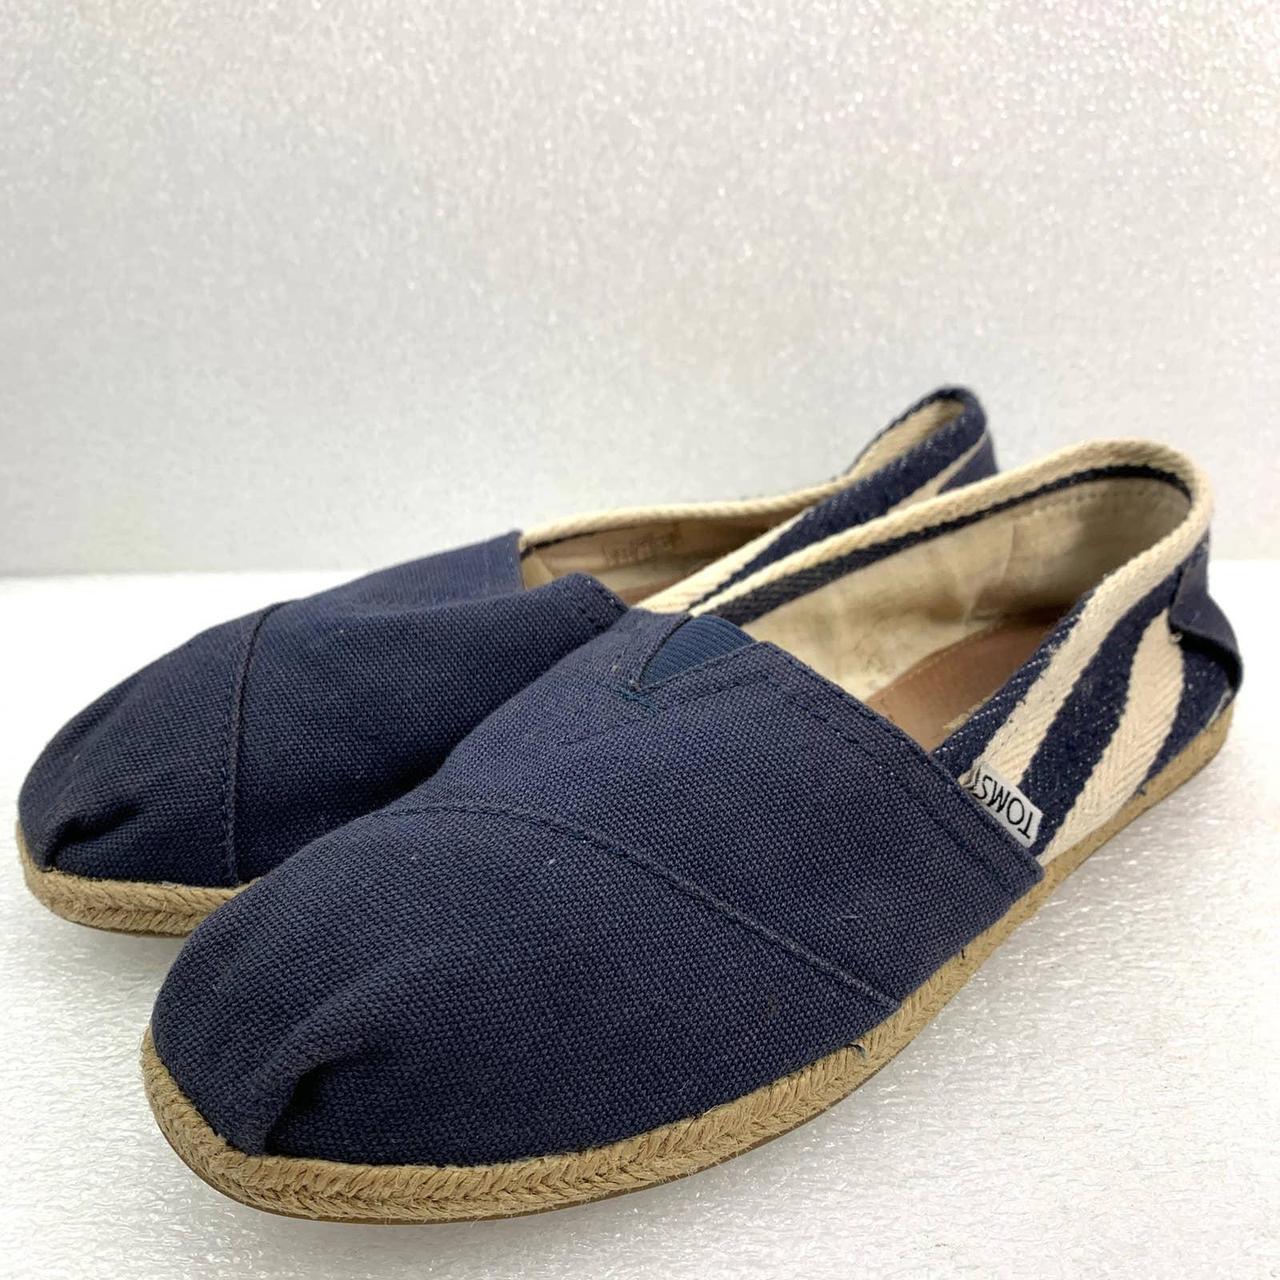 Toms Classic Slip-On Casual Shoes in Navy Blue ... - Depop